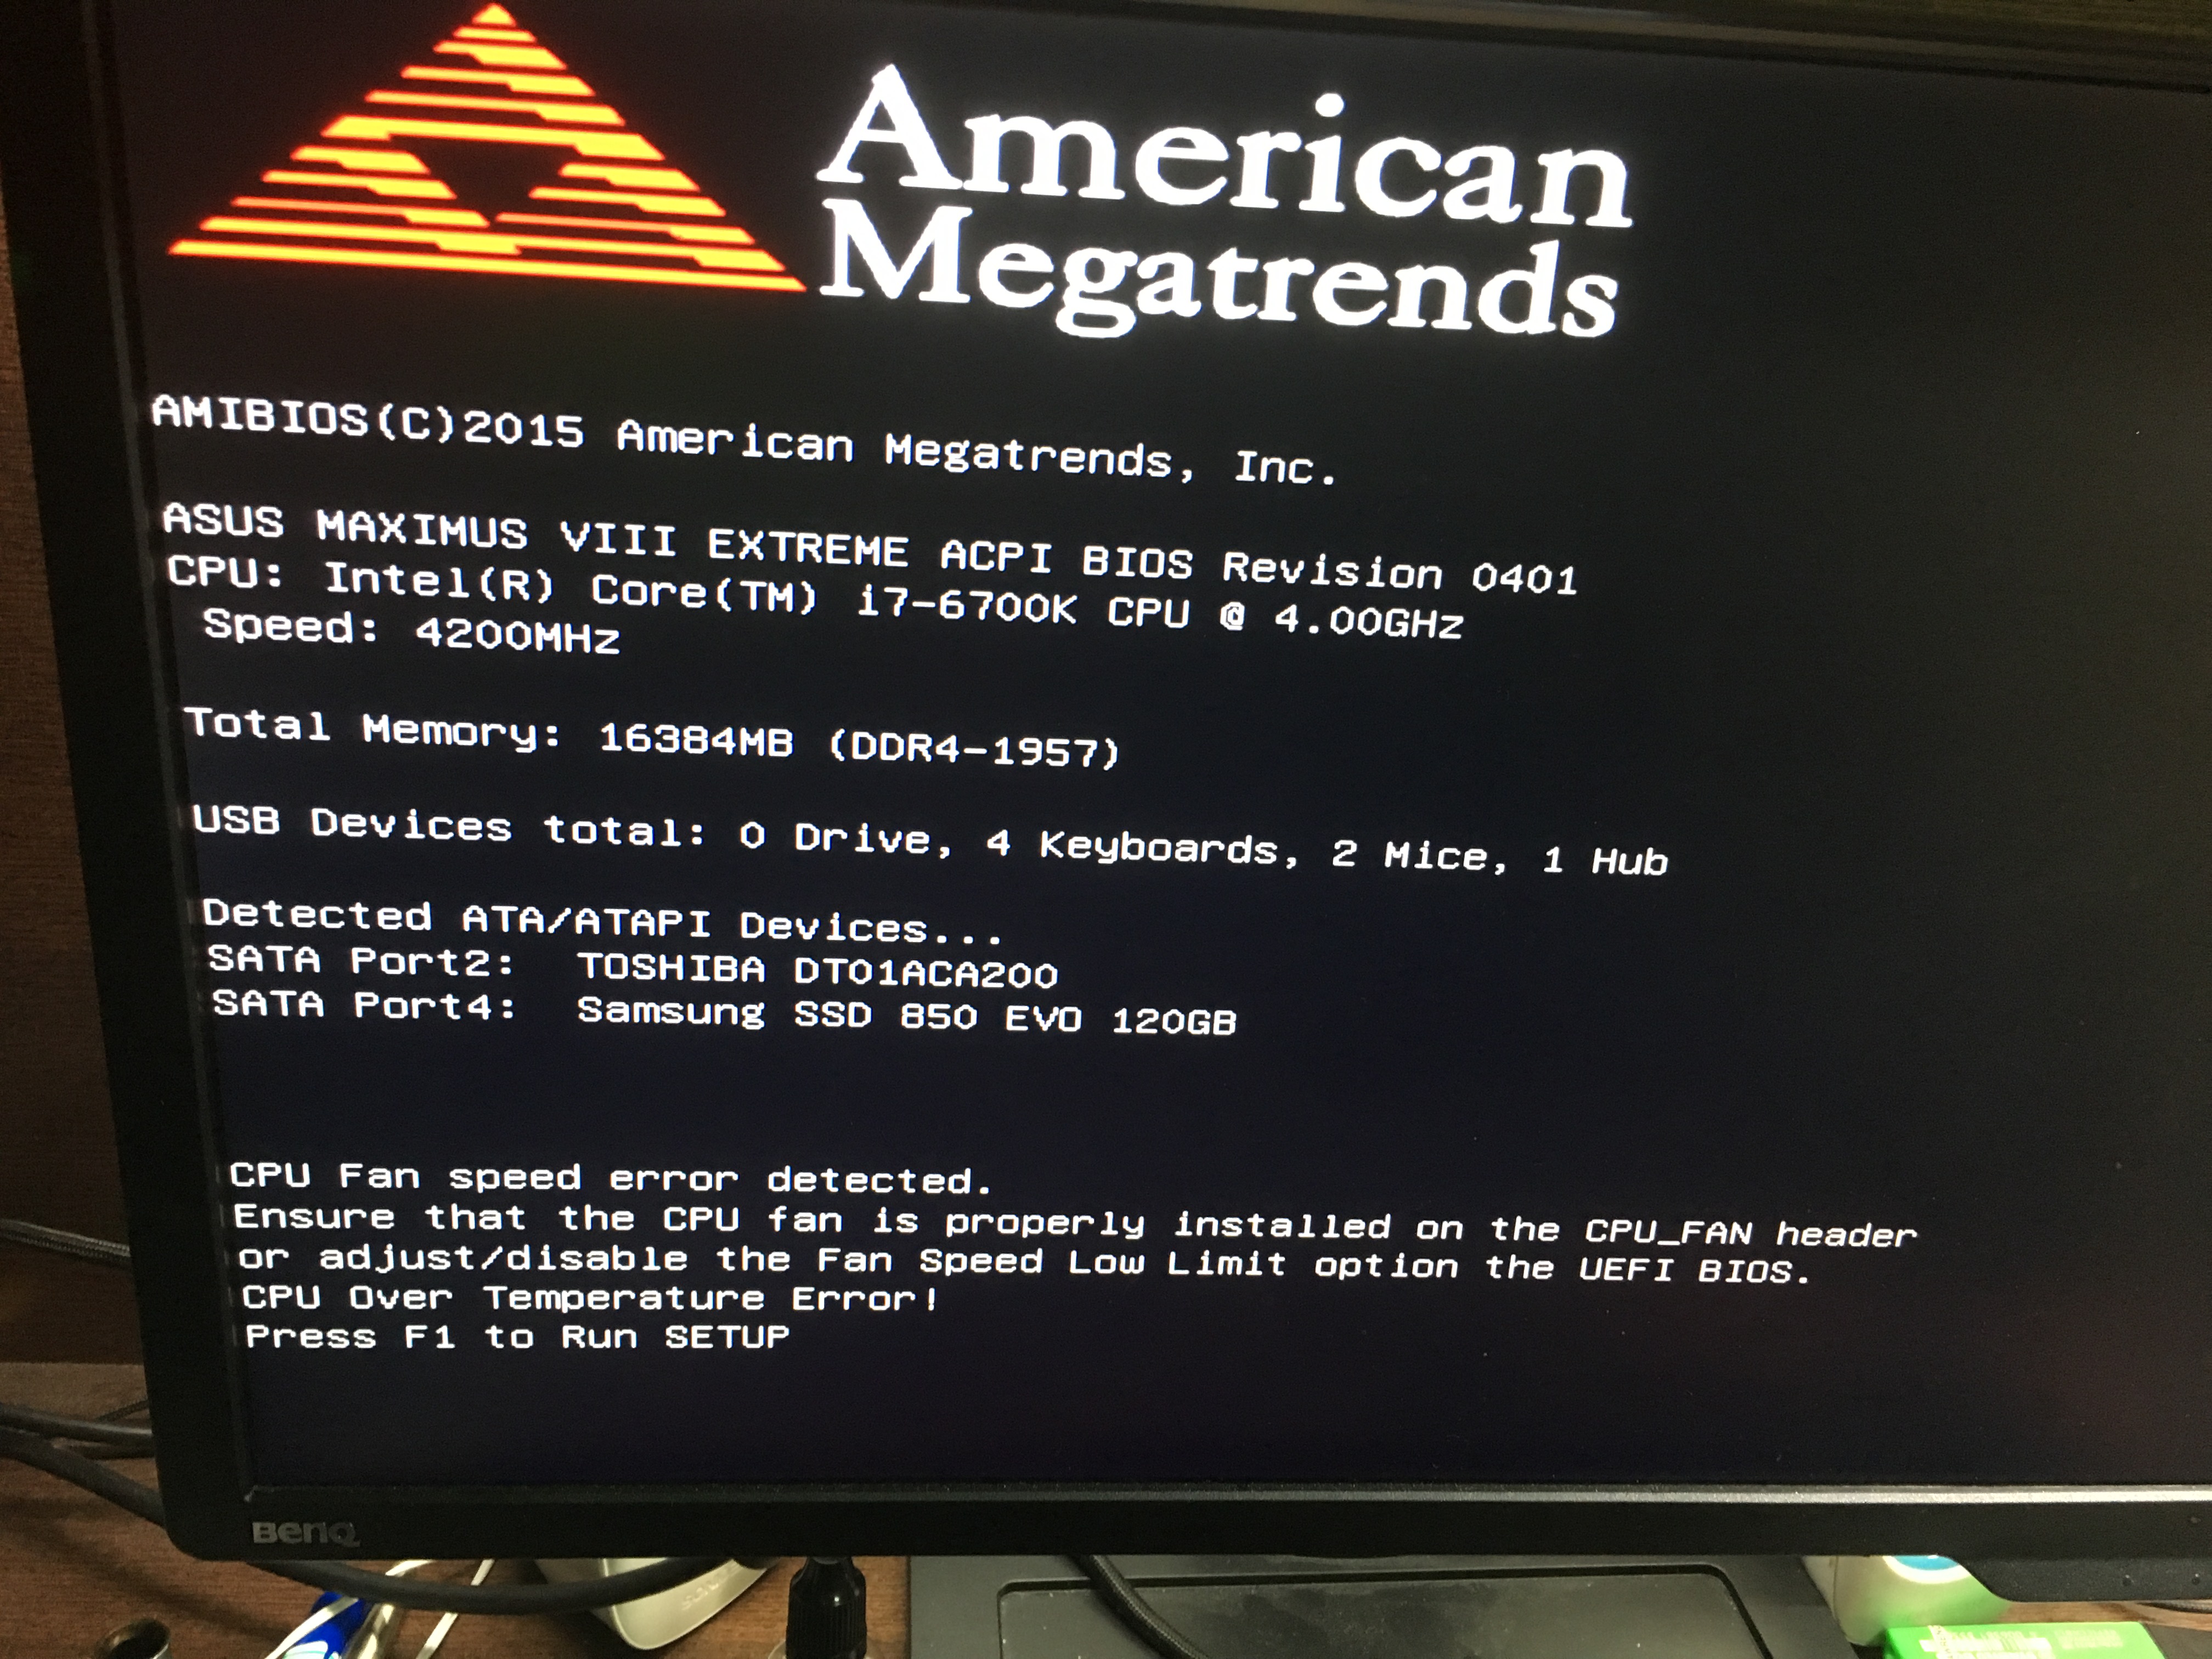 Unable to run Setup on American Megatrends BIOS